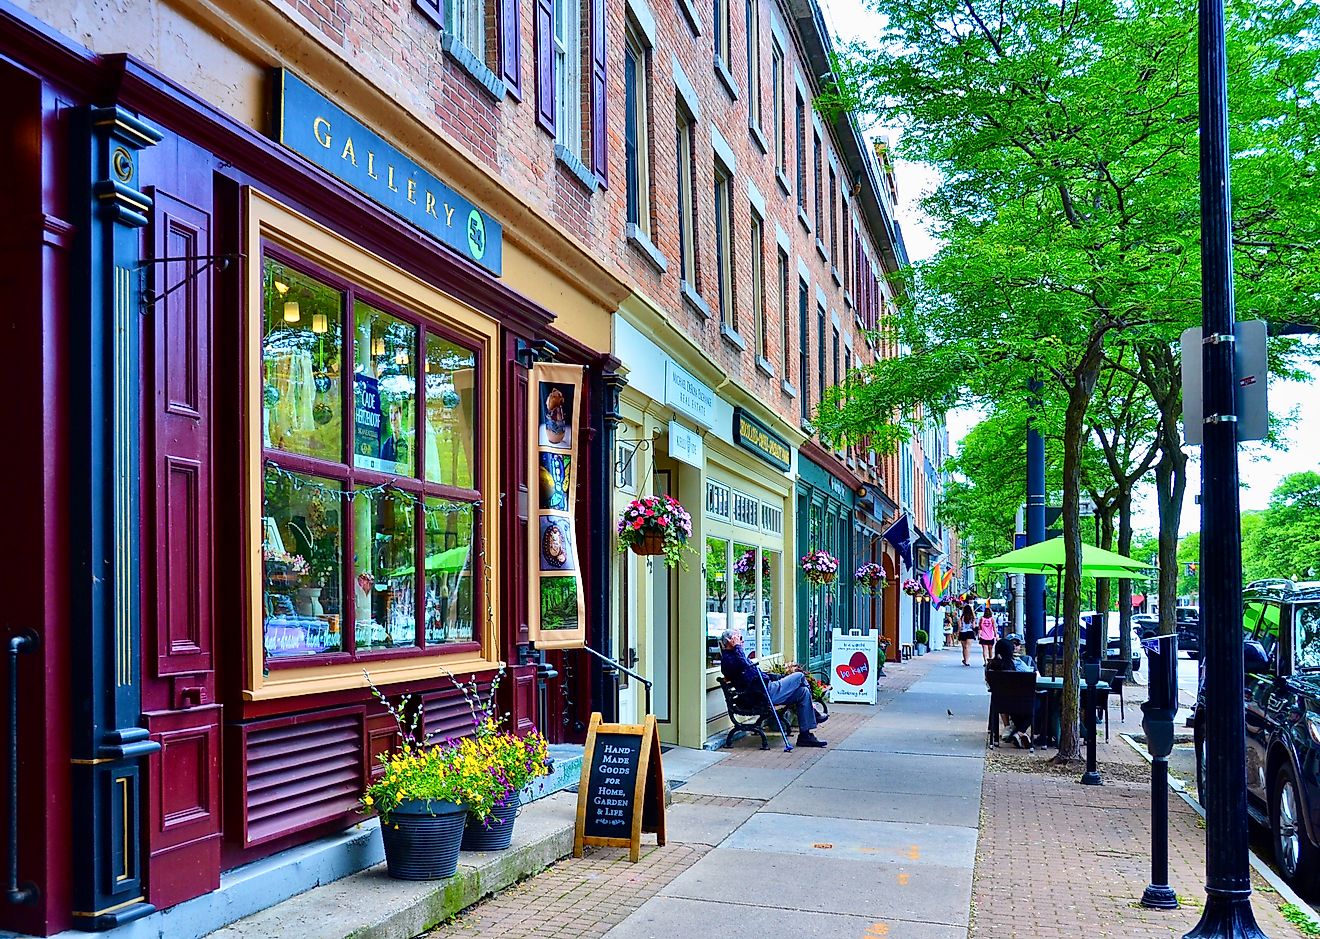 Street view of Skaneateles, a charming lakeside hideaway perched atop one of the Finger Lakes. Editorial credit: PQK / Shutterstock.com